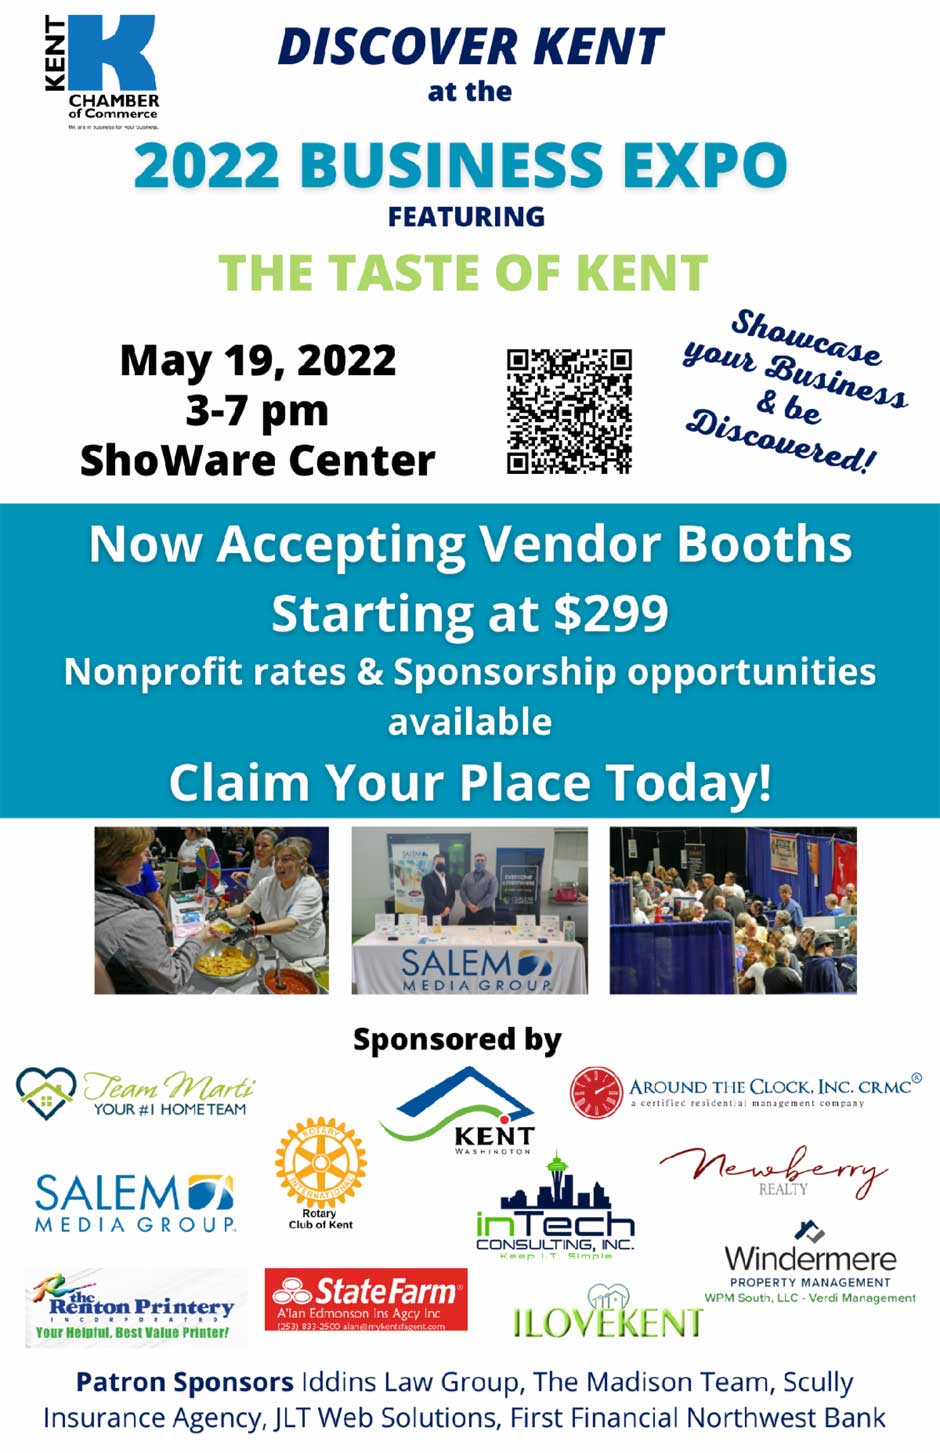 REMINDER: Kent Chamber’s Business Expo & ‘Taste of Kent’ is Thursday, May 19